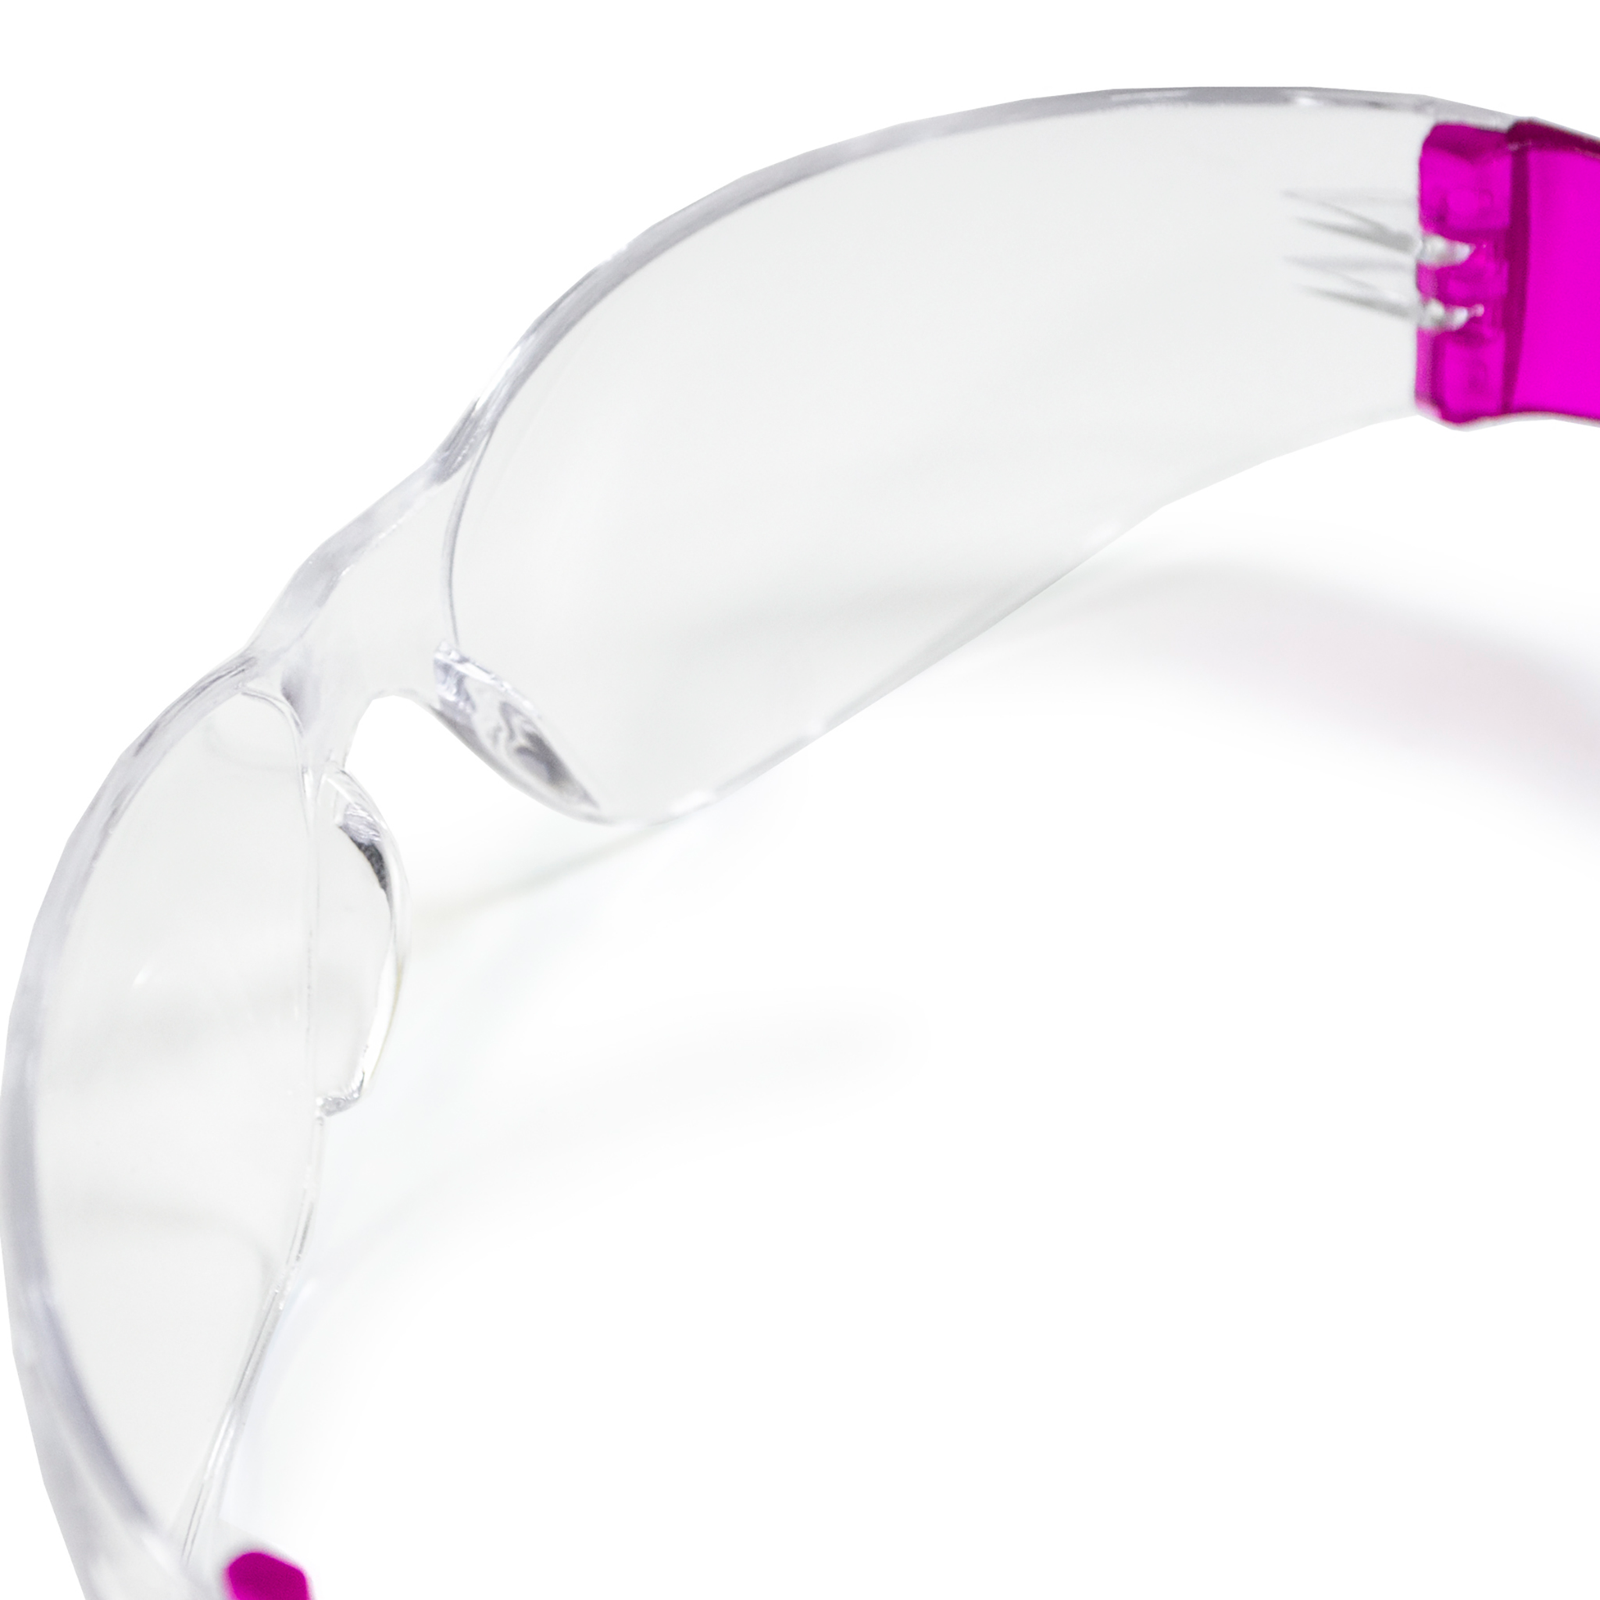 Clear safety glasses for high impact protection UV coated